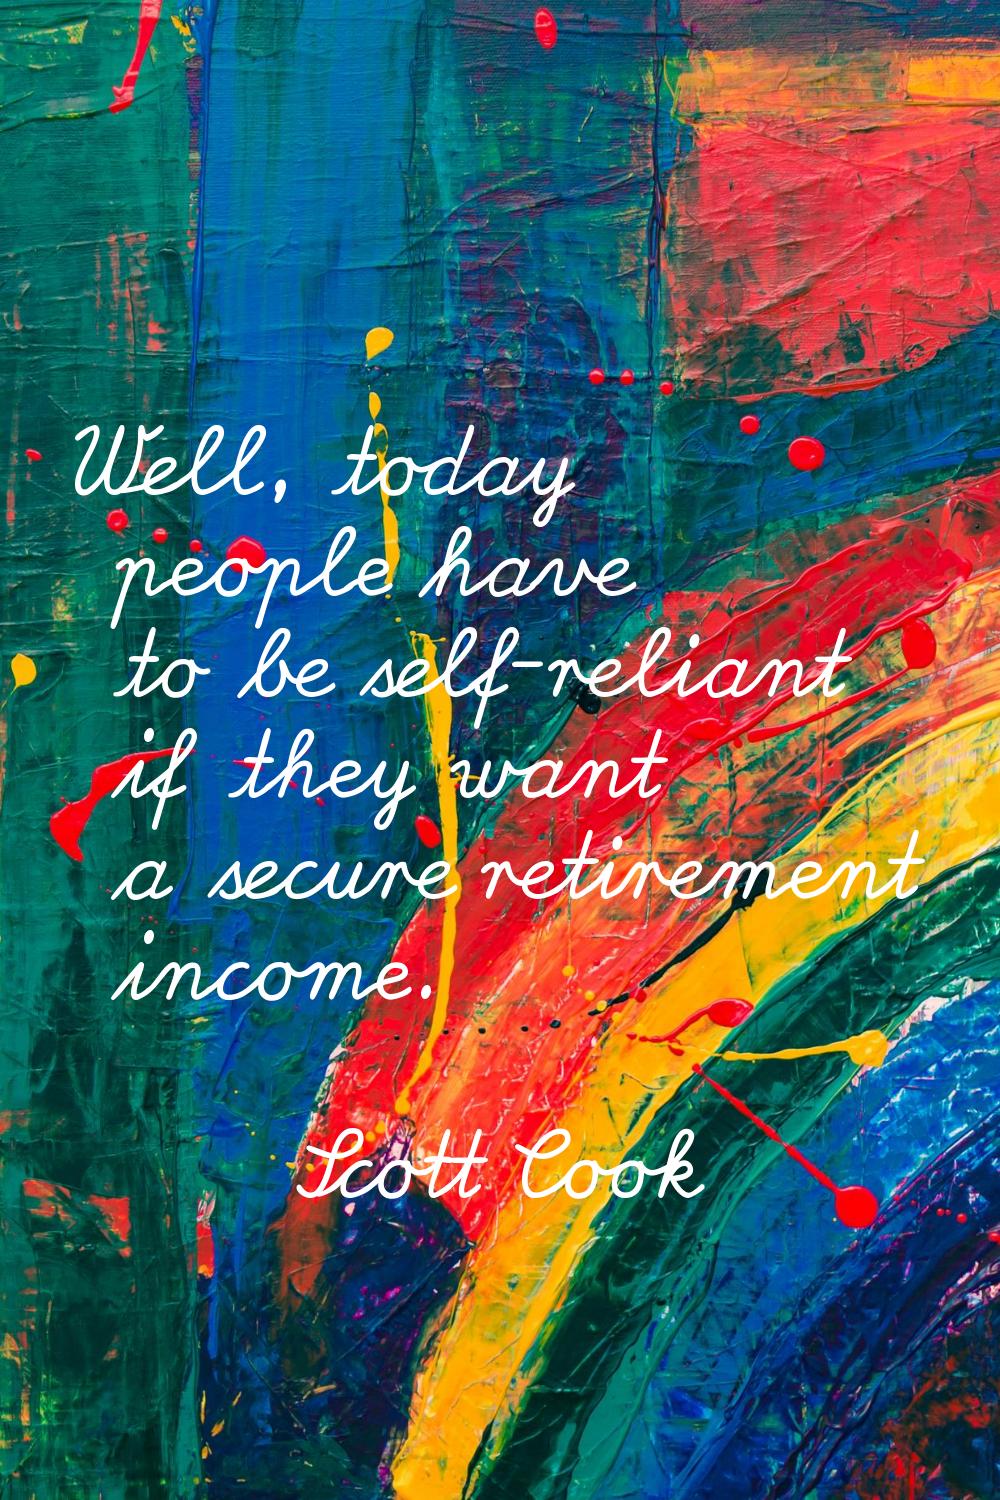 Well, today people have to be self-reliant if they want a secure retirement income.